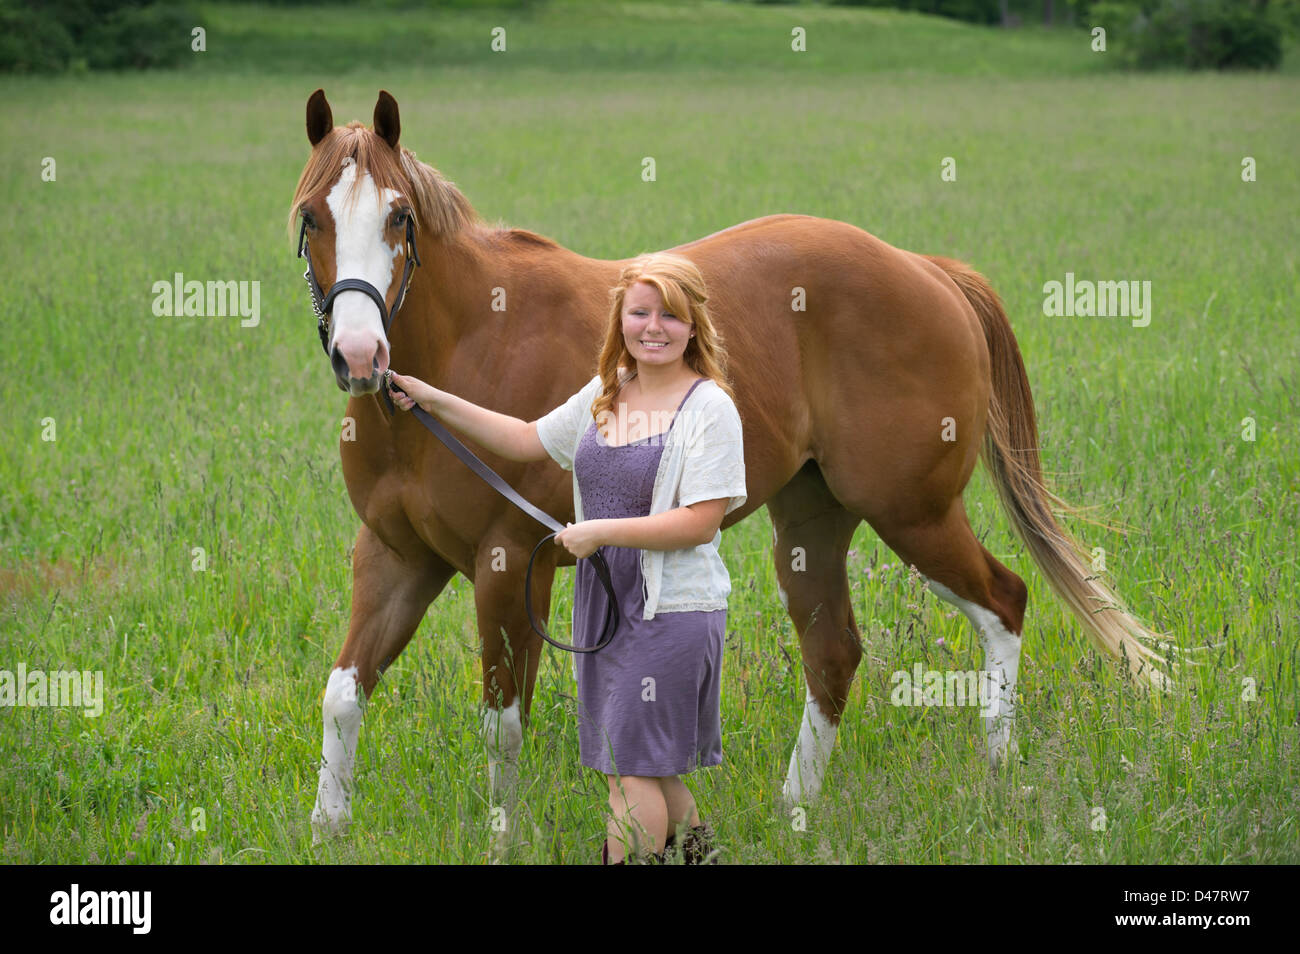 Young woman leading horse through grassy field, an eighteen year old red haired horsewoman. Stock Photo